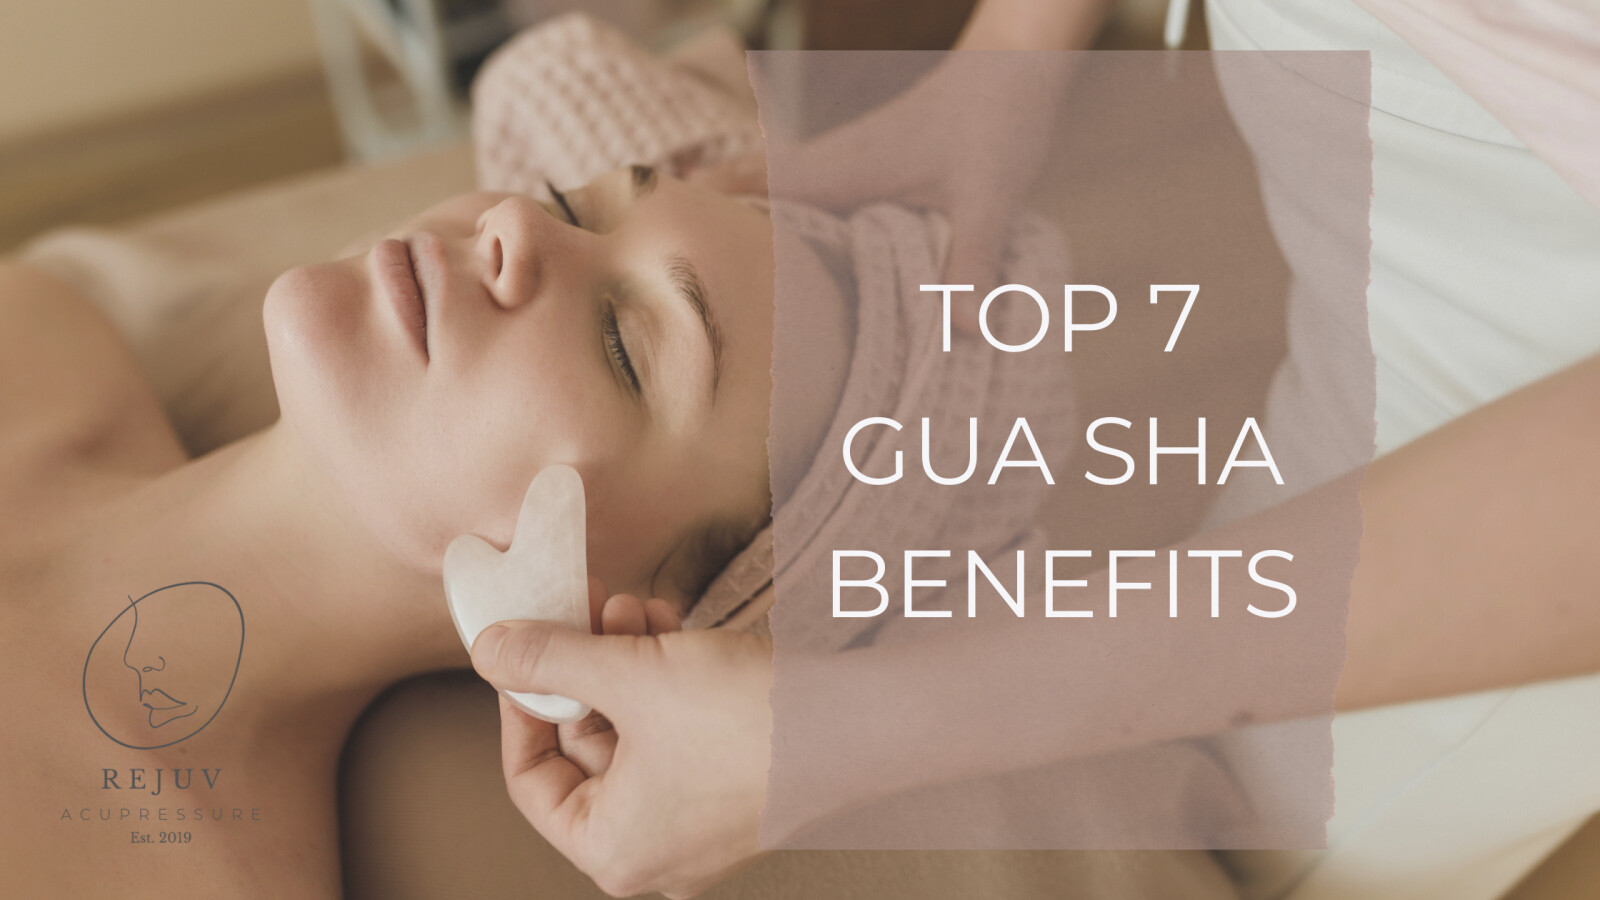 Get Your Glow On! Here's Our Top 7 Gua Sha Benefits!